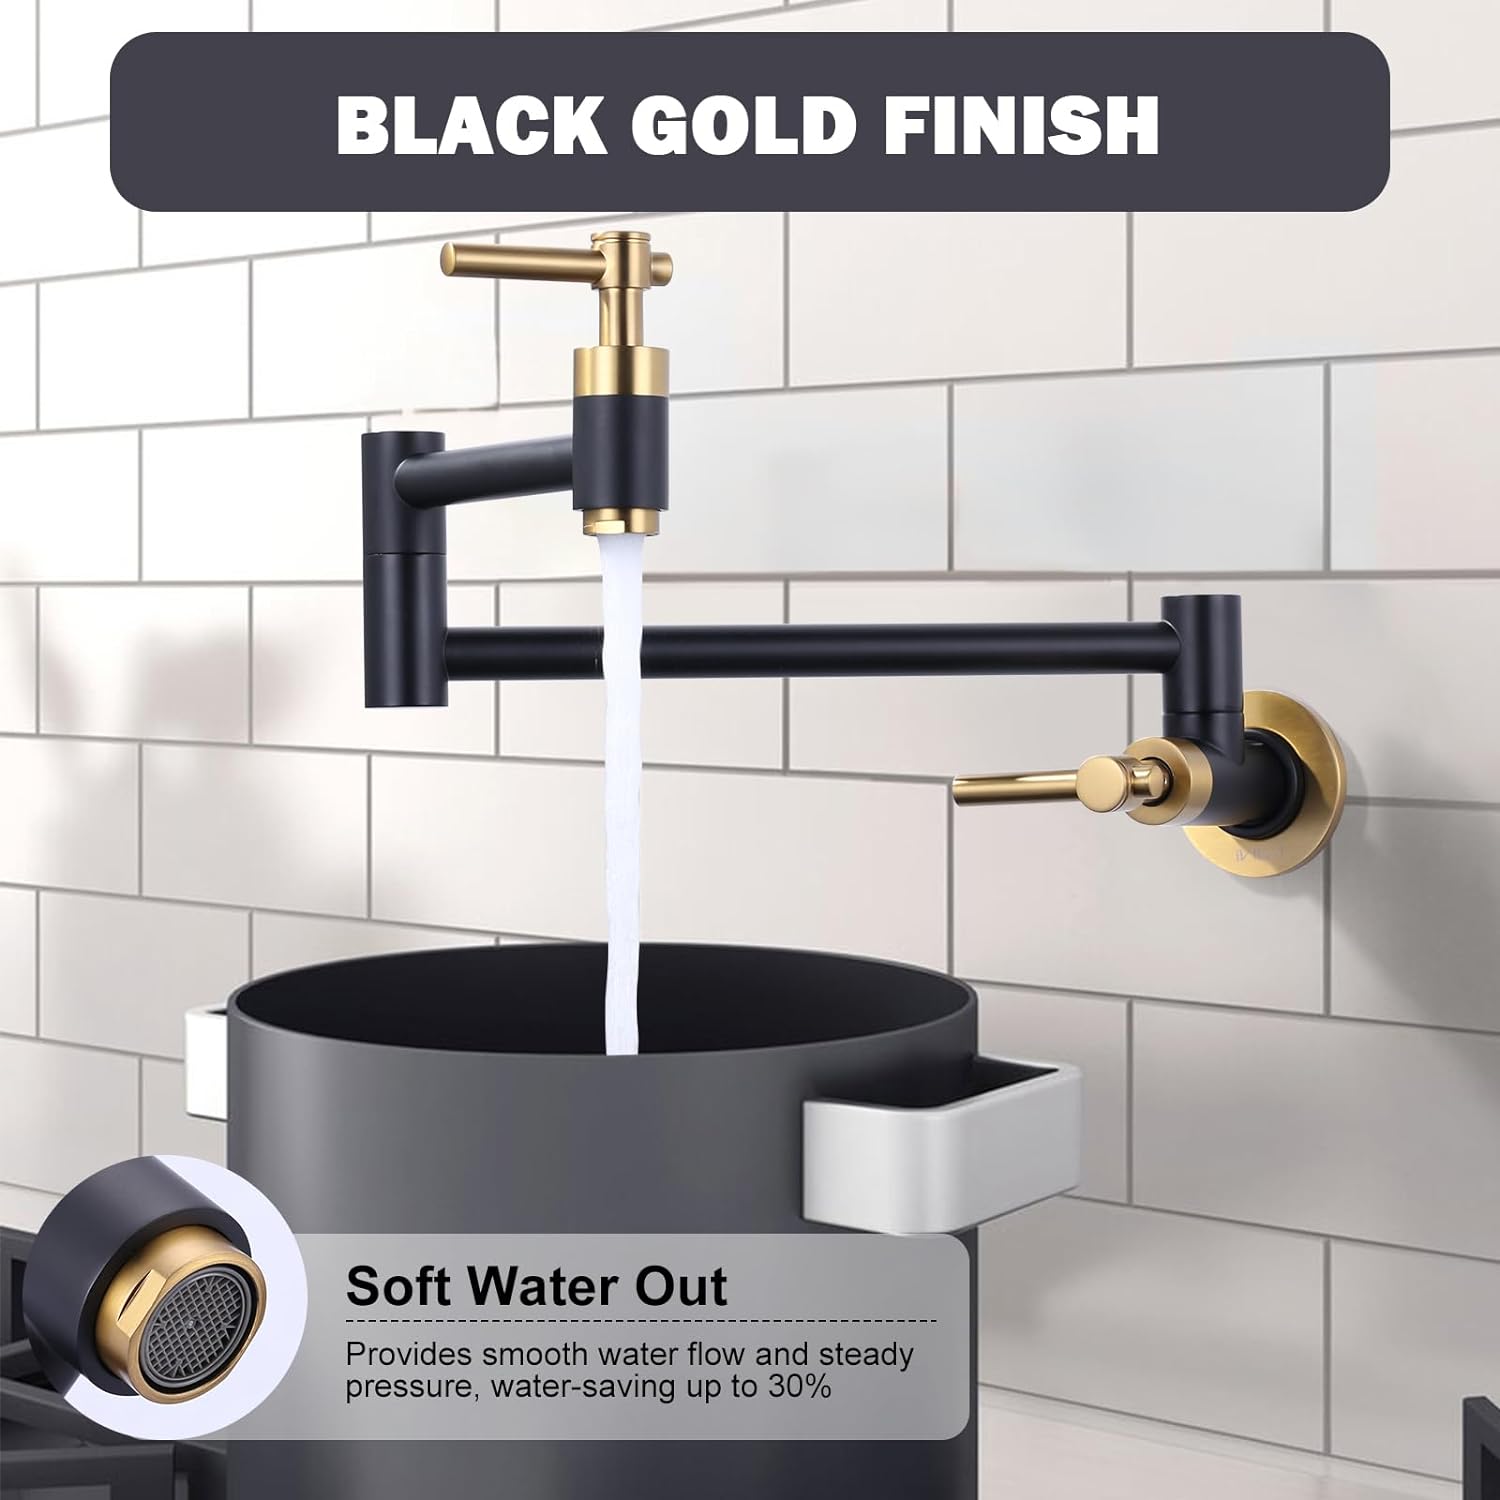 iVIGA Pot Filler Faucet Black & Gold Wall Mount Over Stove - Kitchen Faucets - 2